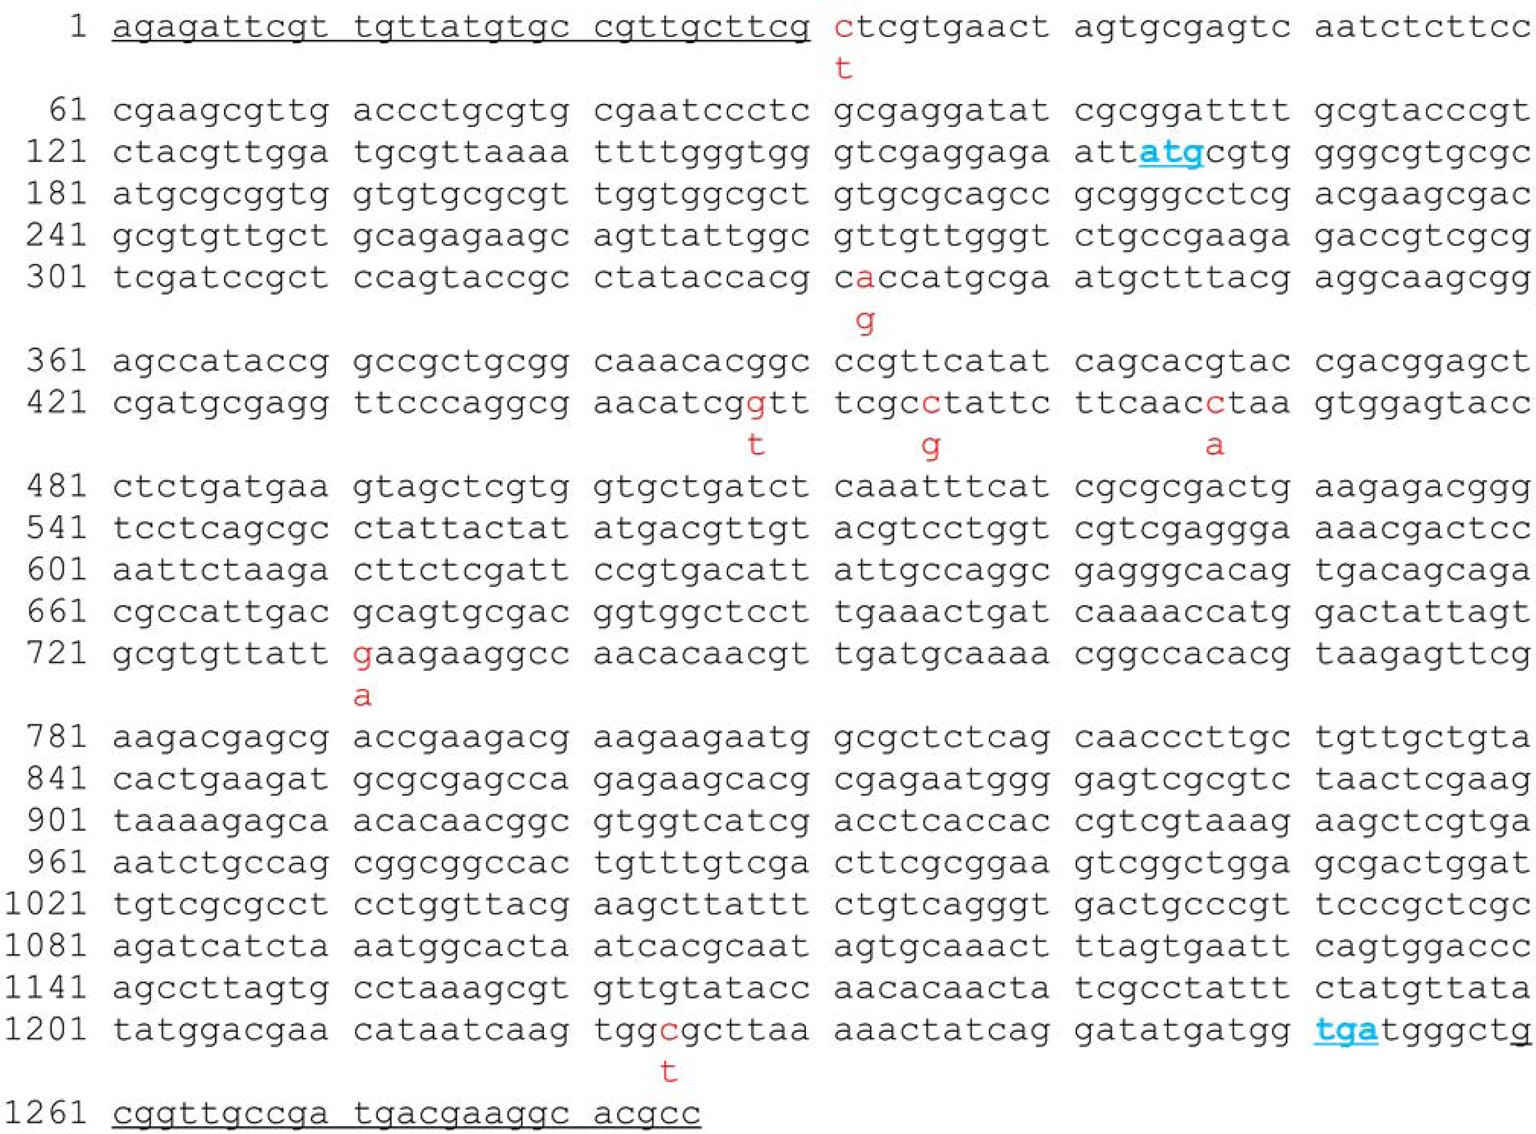 Sequence analysis. The 1,285-bp full-length cDNA of B. mori dpp was cloned into the pGEMT-Easy vector and subjected to DNA
sequencing. Sequence data of DNA fragments was analyzed using the BLAST search (http://www.ncbi.nlm.nih.gov). Sequence data for the
full-length cDNA of B. mori dpp is shown. In total, 7 base pairs (red characters) were replaced.